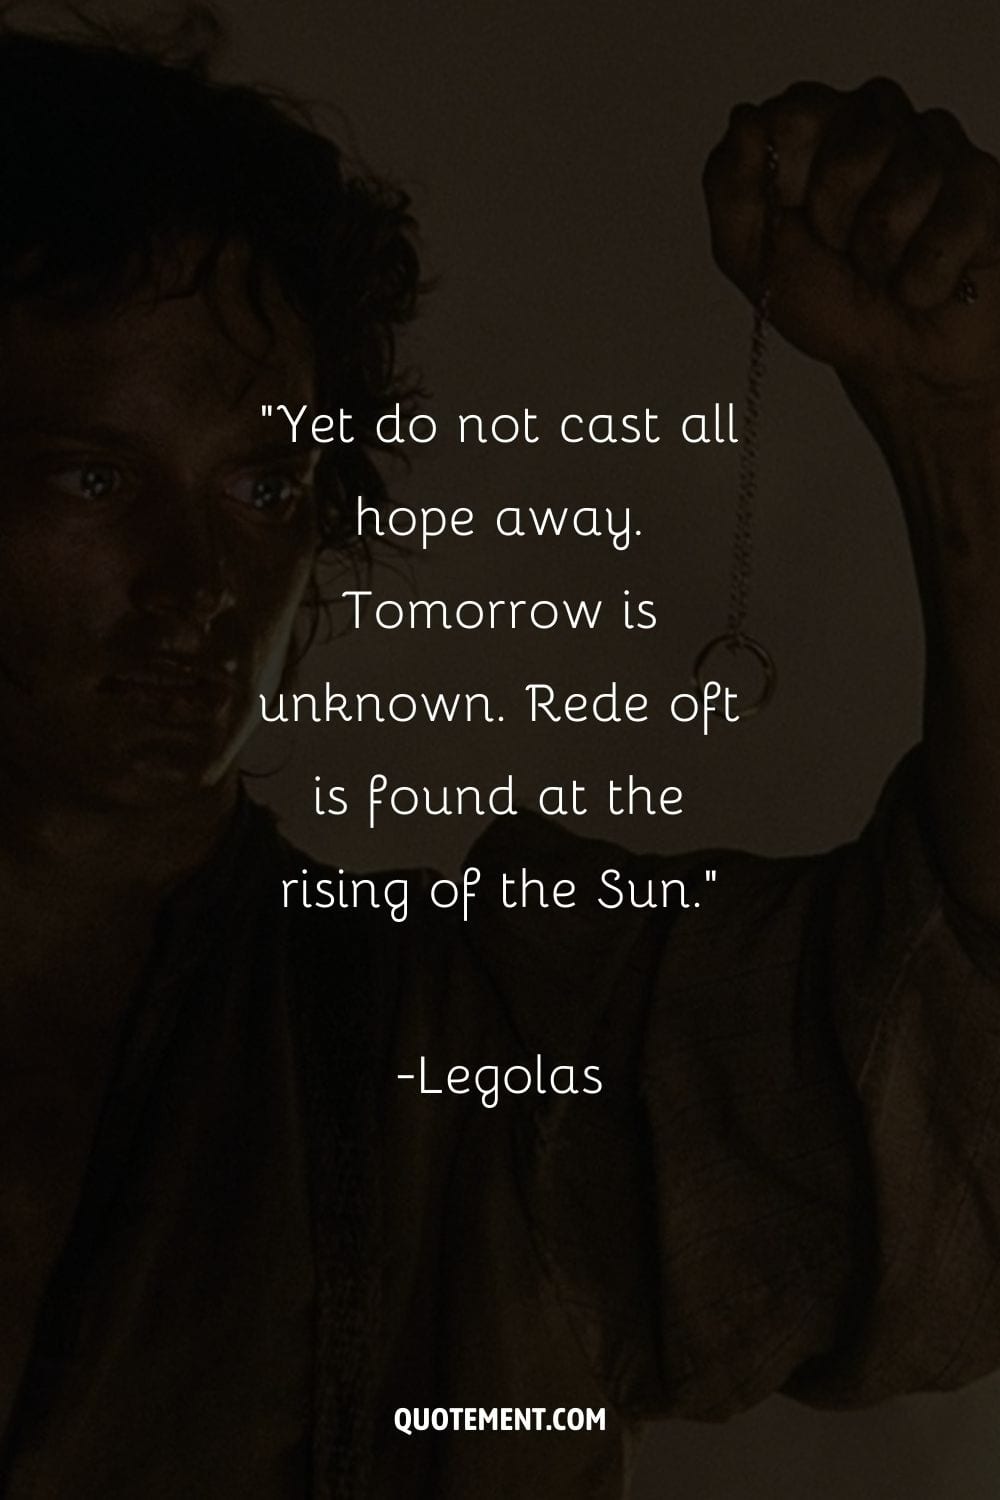 Yet do not cast all hope away. Tomorrow is unknown. Rede oft is found at the rising of the Sun